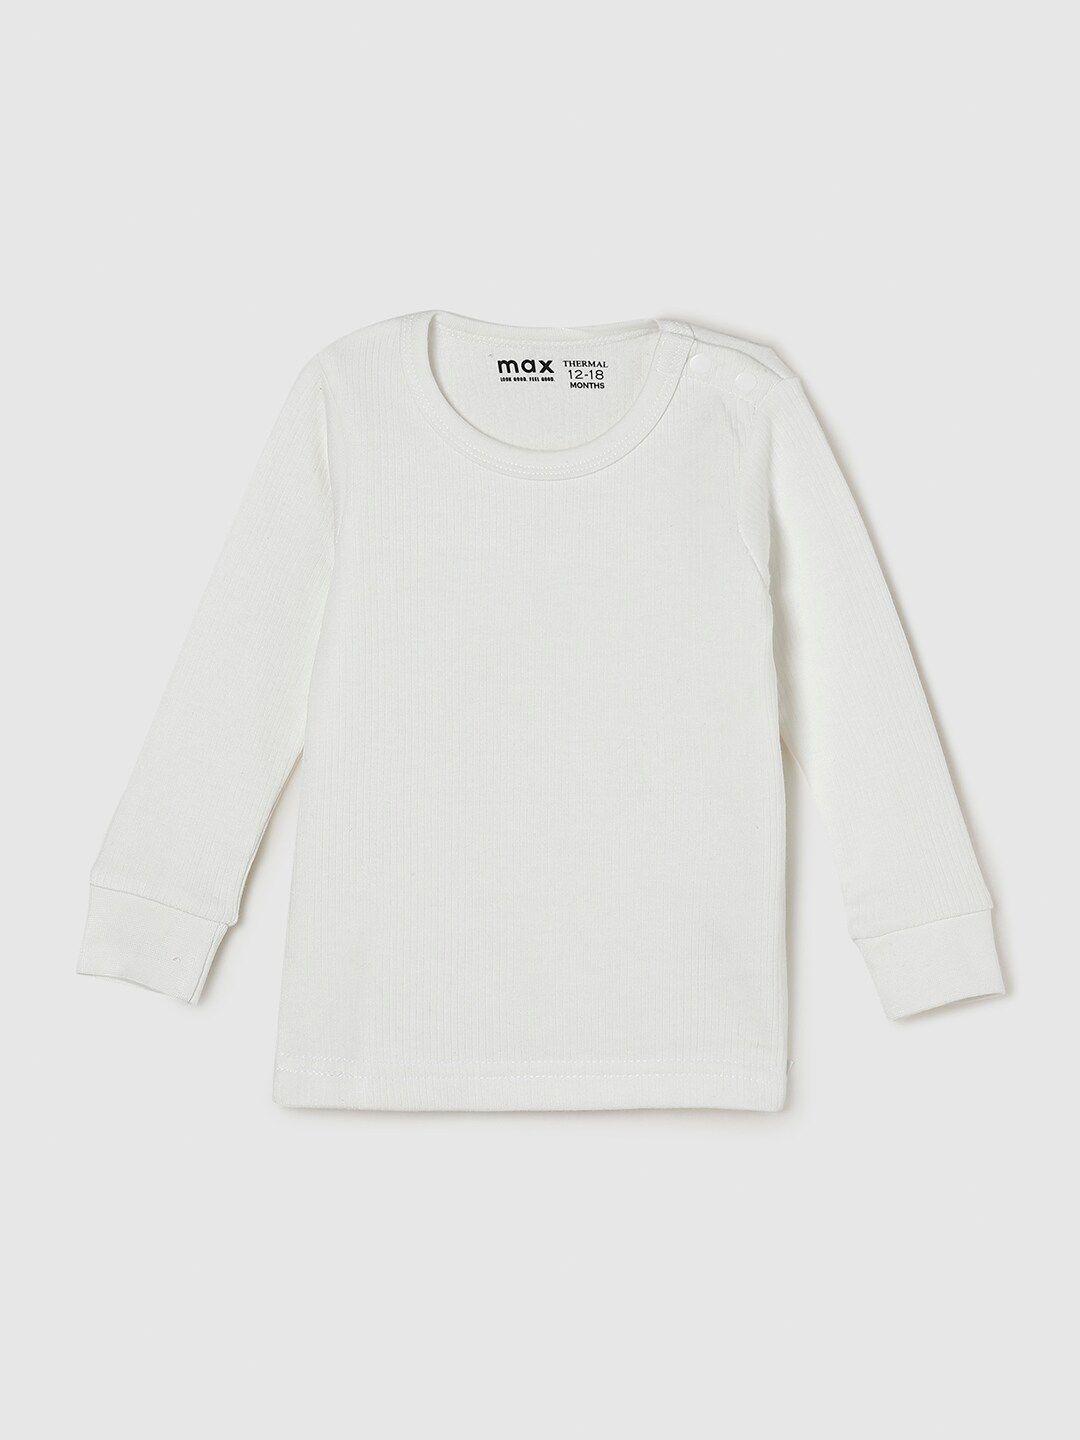 max-boys-off-white-solid-round-neck-cotton-t-shirt